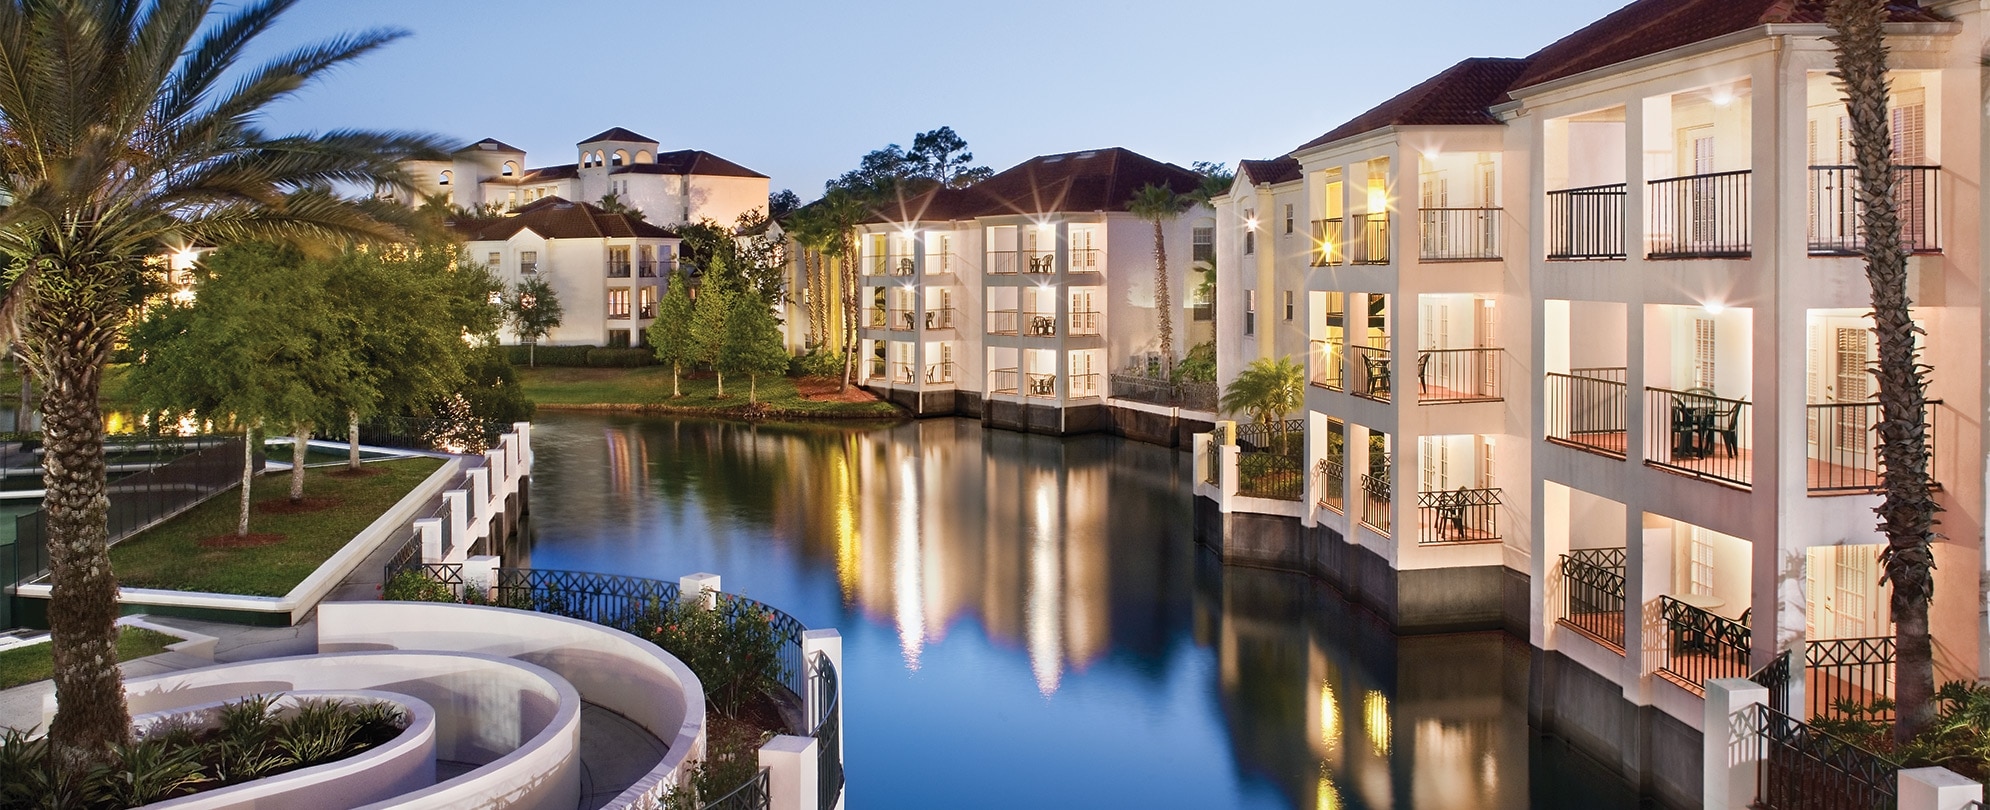 The buildings and balconies of Club Wyndham Star Island, a timeshare resort in Kissimmee, FL, situated along a canal.